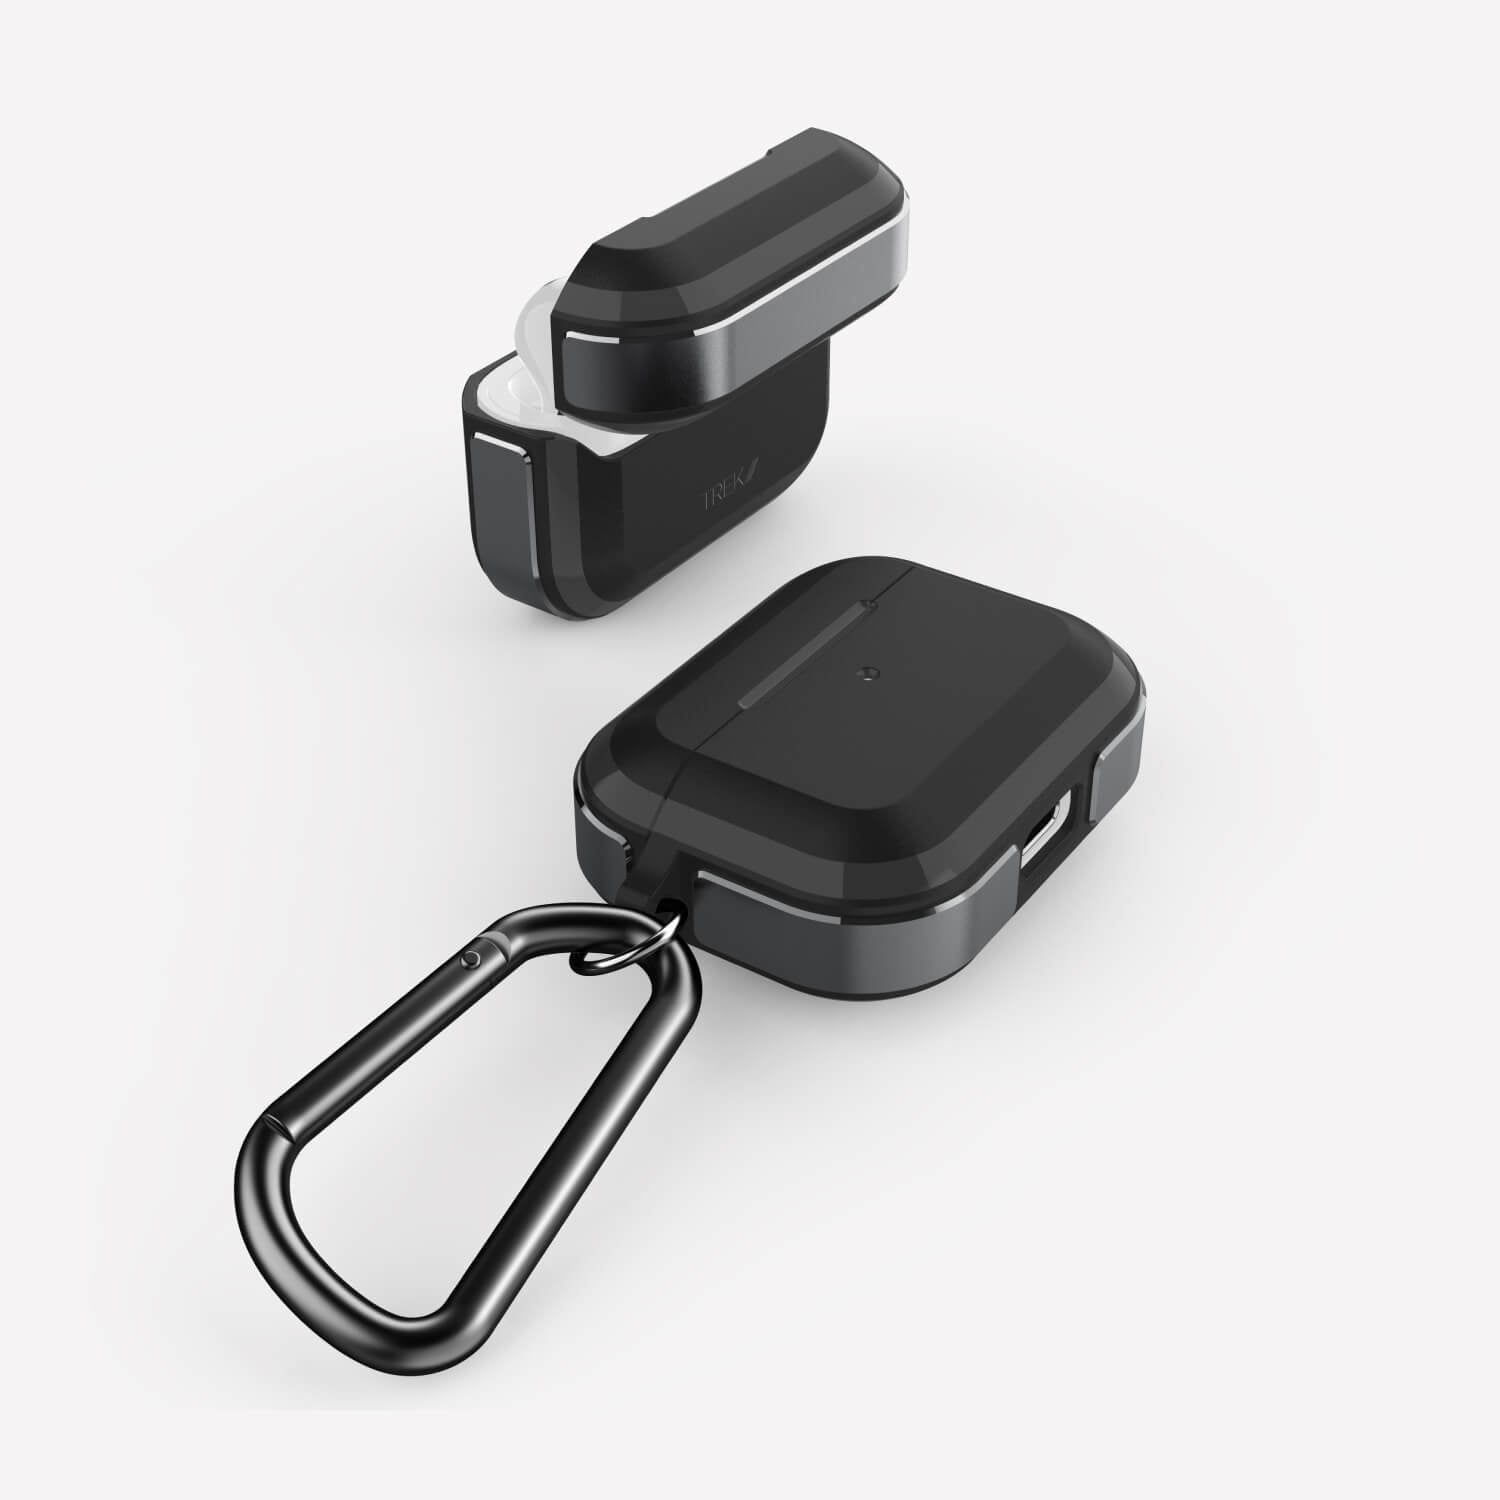 Raptic AirPods Pro Case - TREK: A pair of wireless earphones with a carabiner attached to them for easy portability and charging.